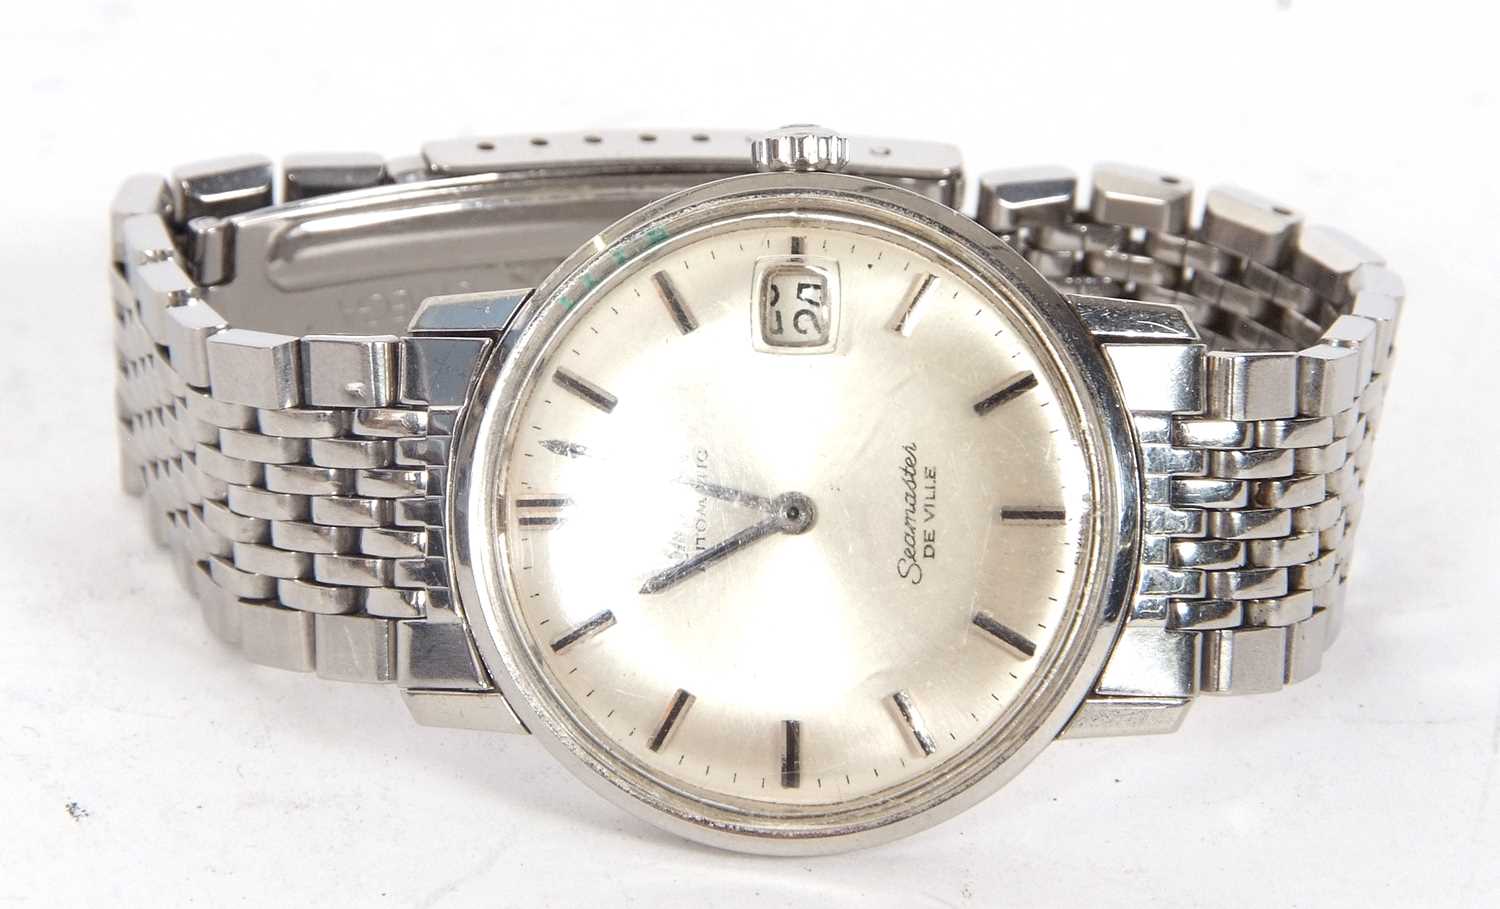 A vintage Omega Geneve Seamaster Deville, it has an automatic movement, the watch has a stainless